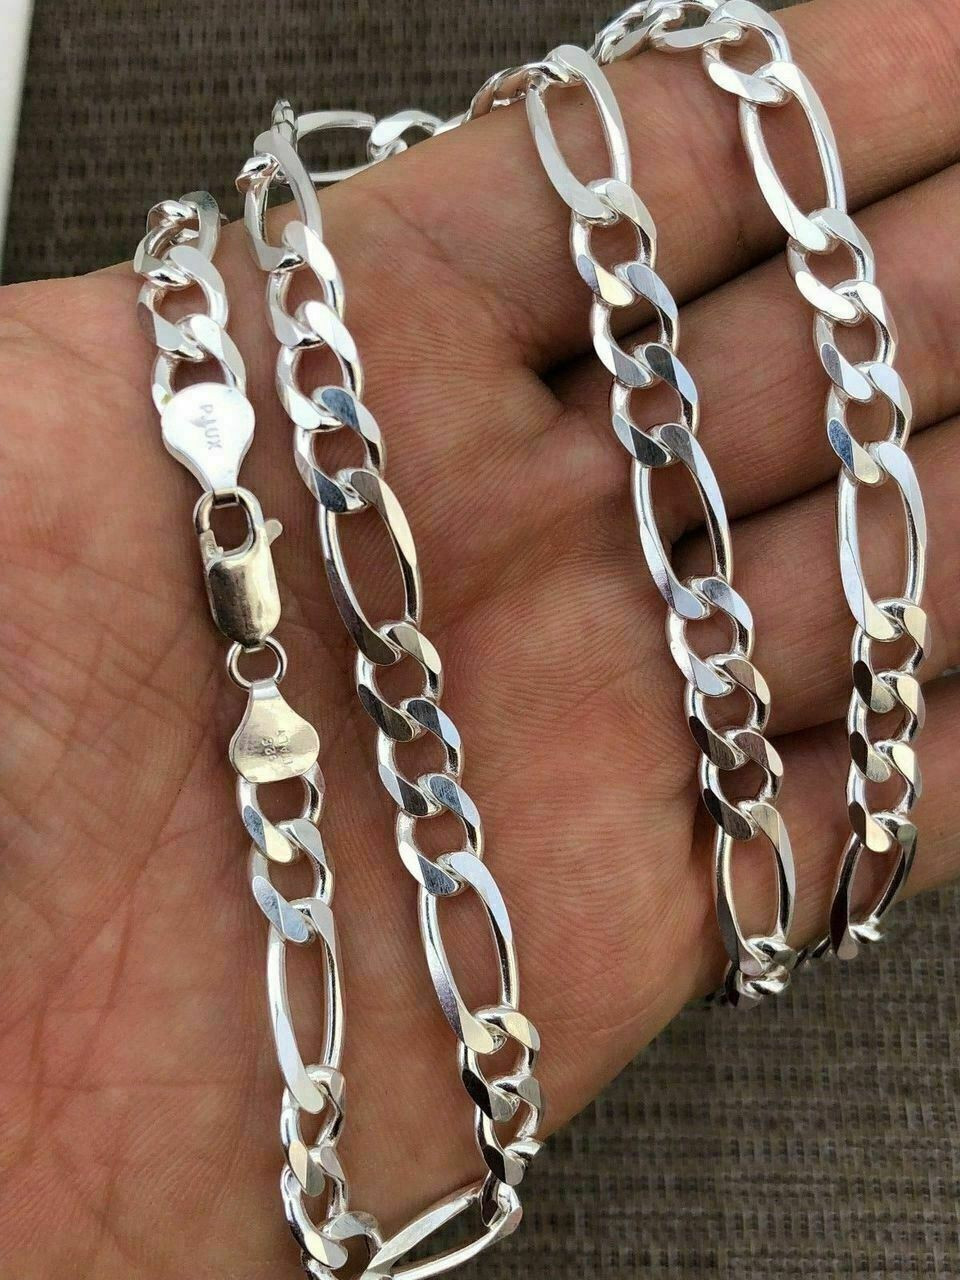 Sterling Silver Figaro Chain Necklace, Men 18 to 32 Inches, 10 mm Wide 32 Figaro Chain / Silver